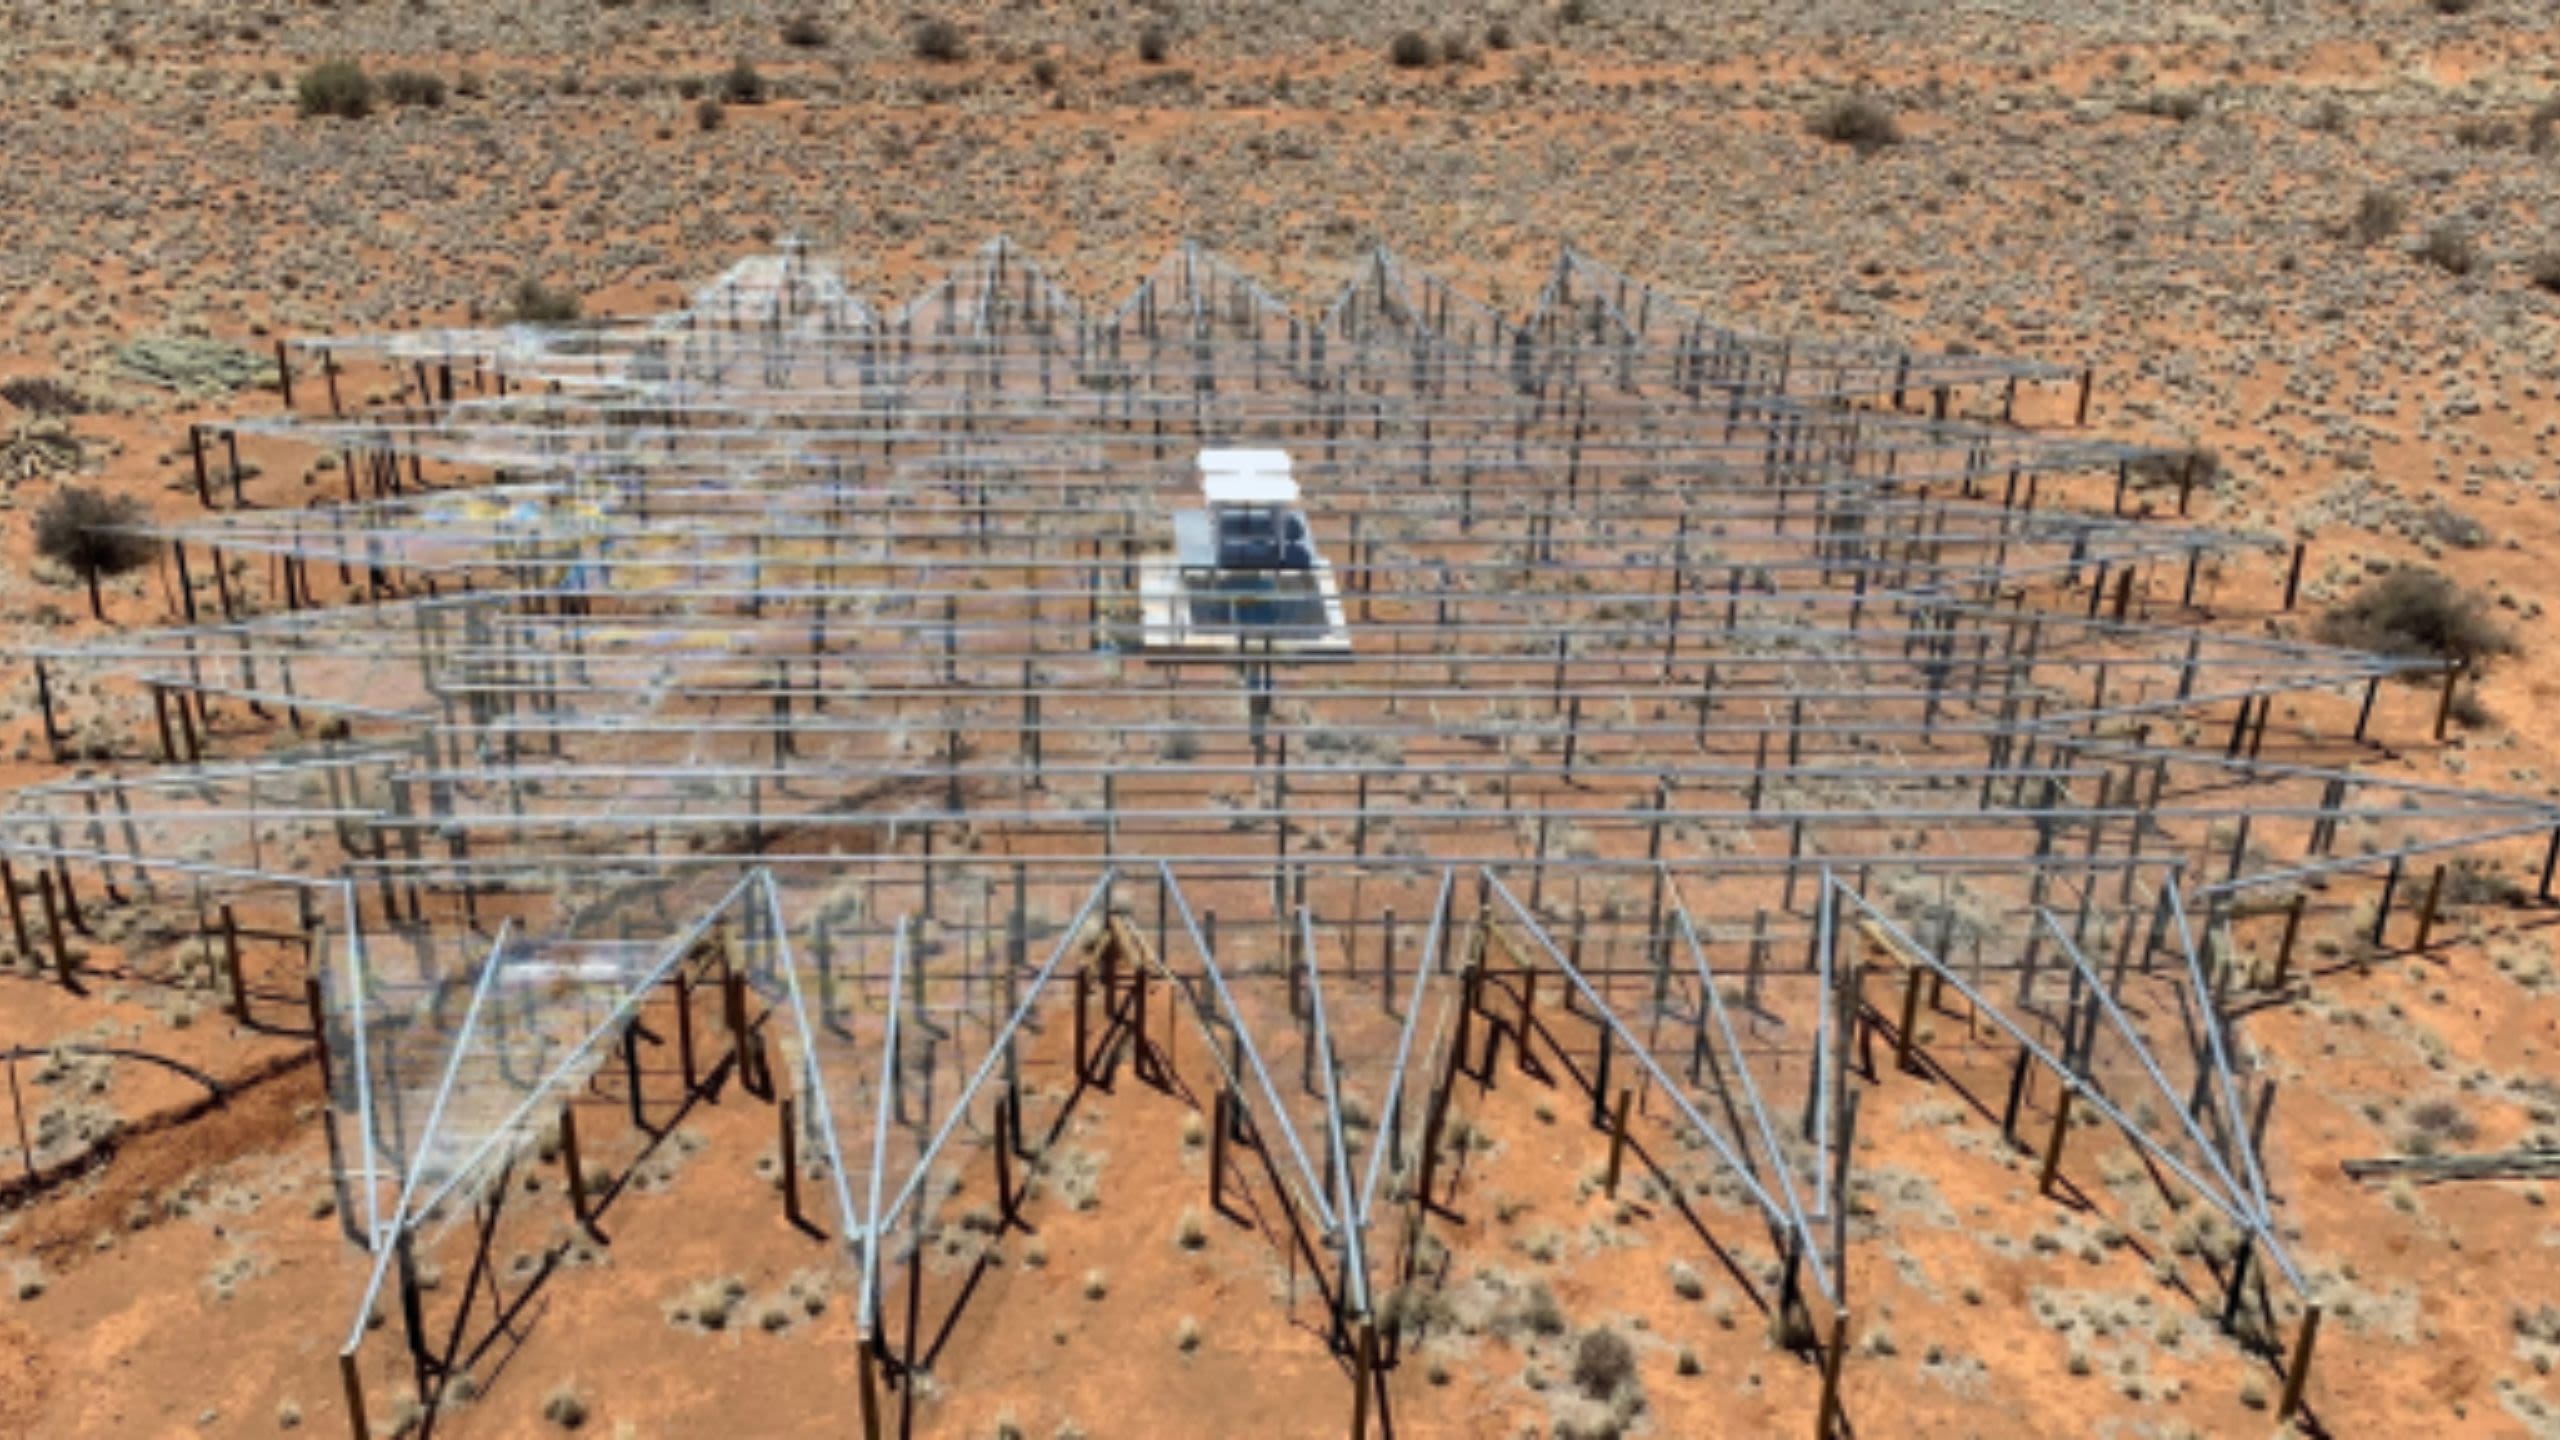 close up of a telecope array in a desert